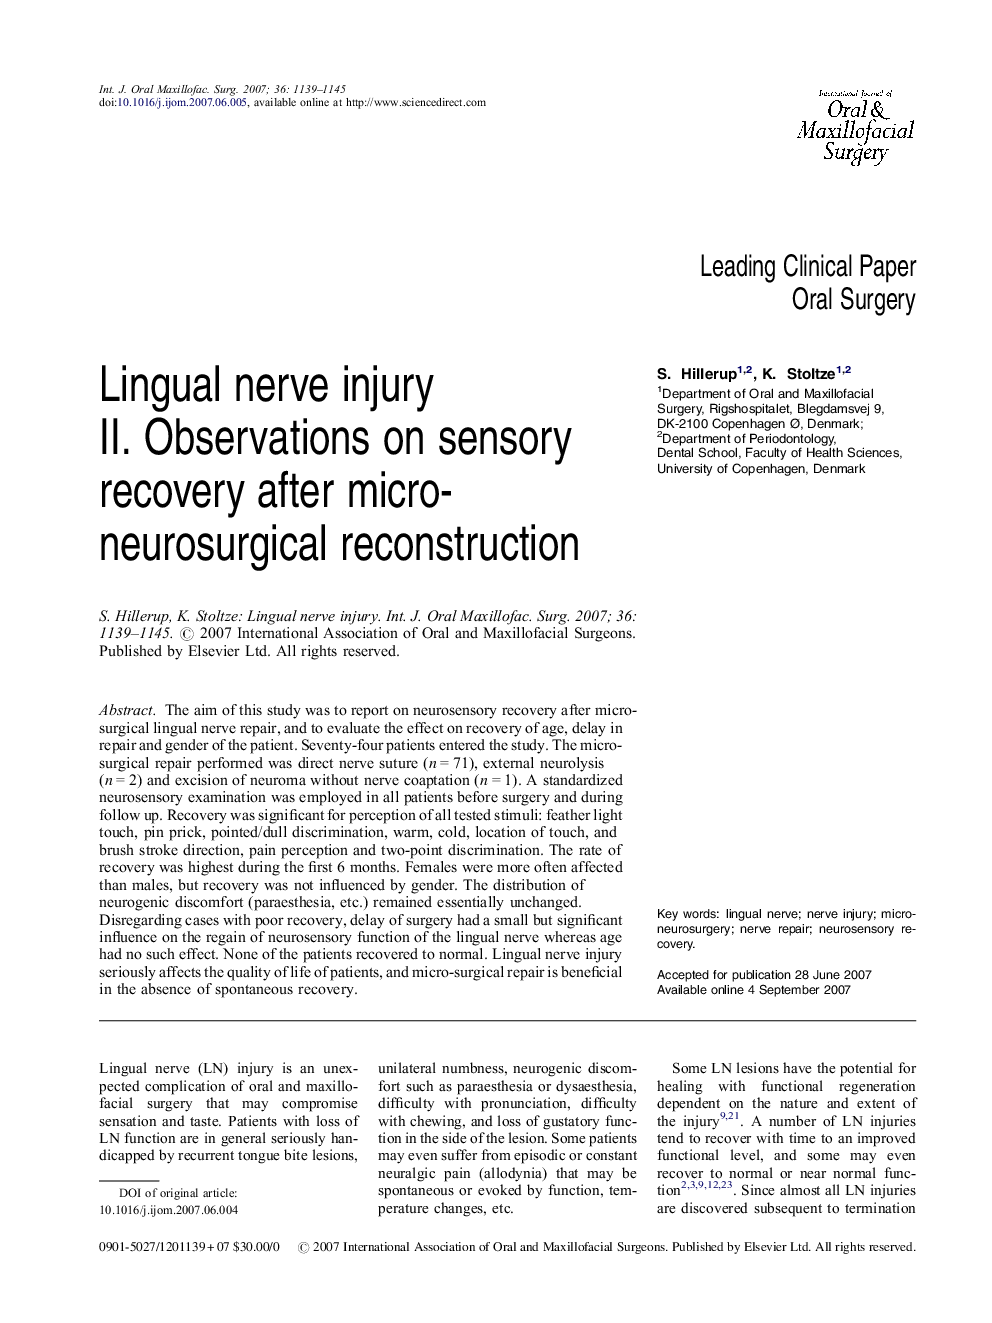 Lingual nerve injury: II. Observations on sensory recovery after micro-neurosurgical reconstruction